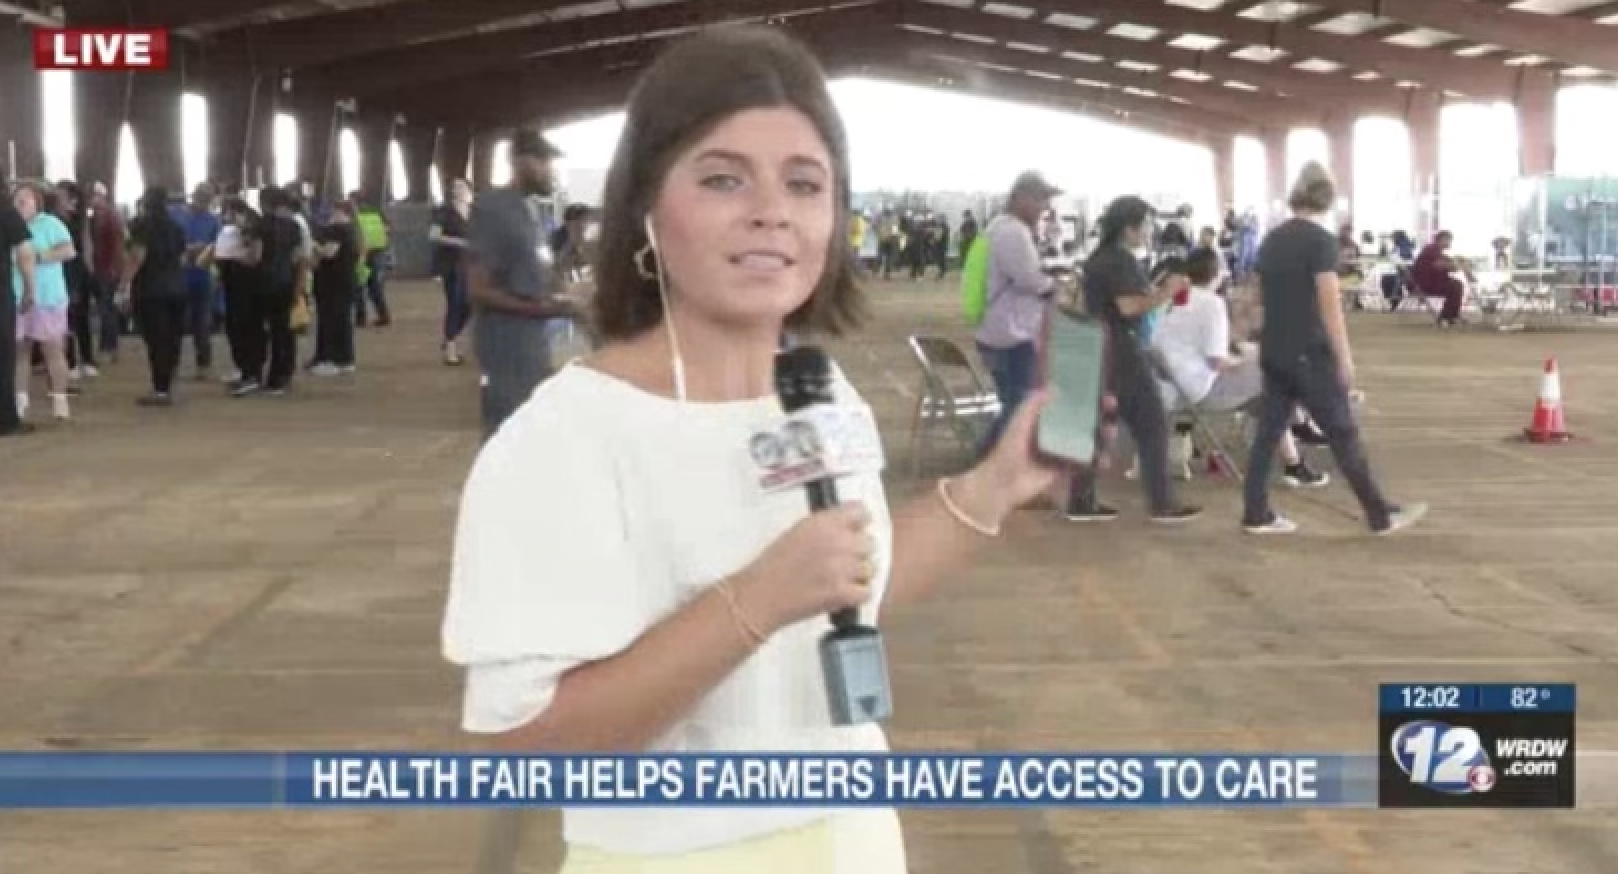 Sydney doing a liveshot on camera, holding a microphone and pointing to a group of people at a health fair